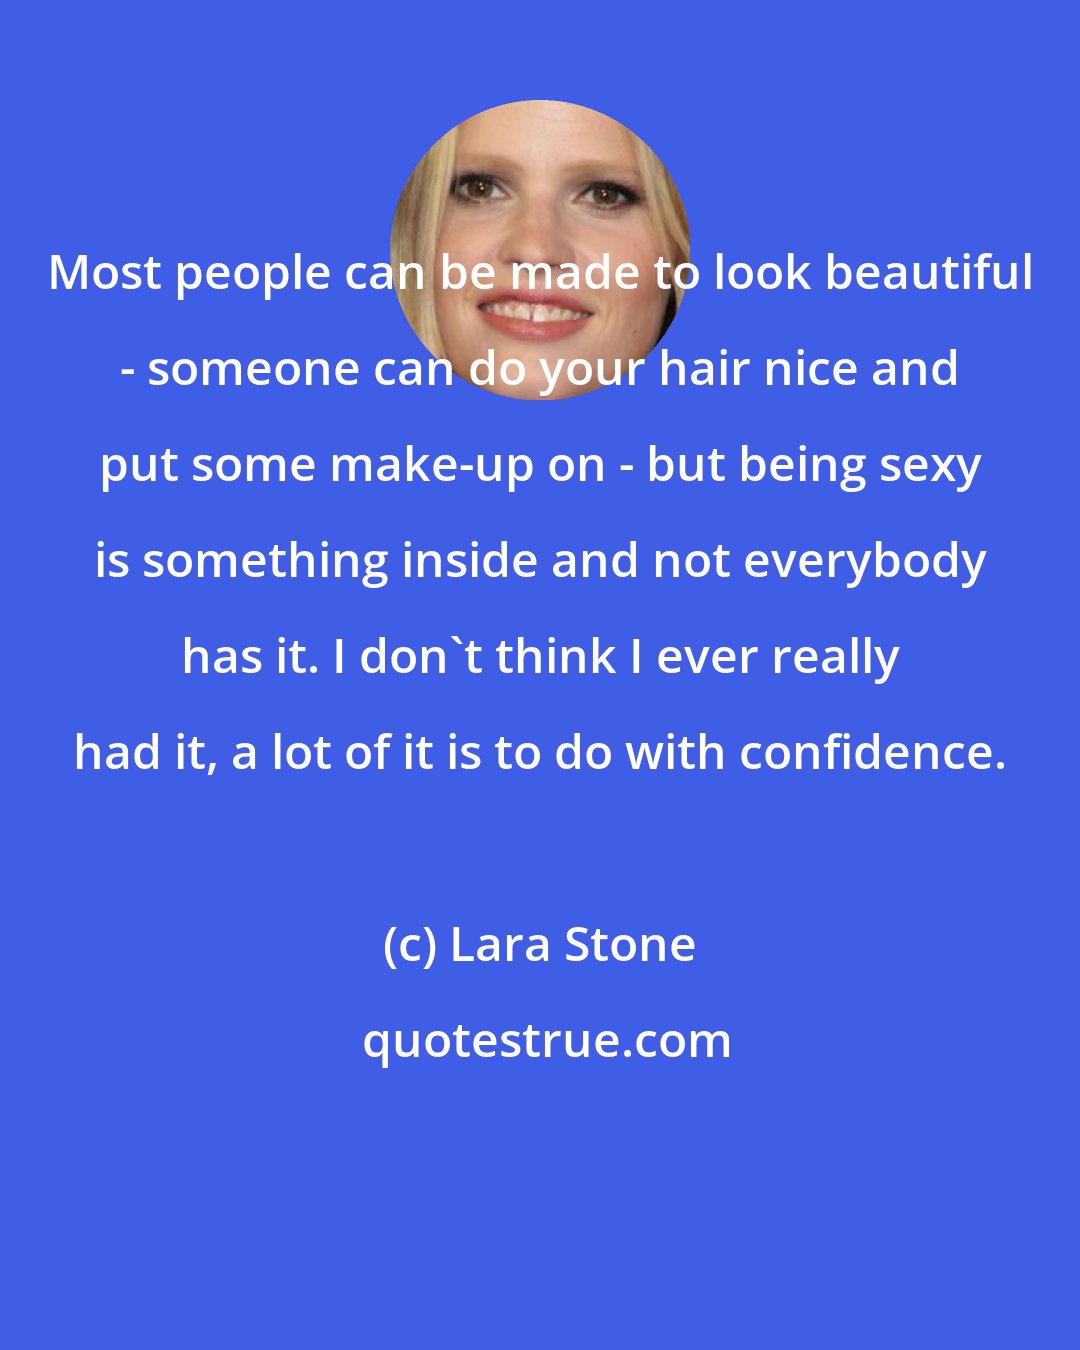 Lara Stone: Most people can be made to look beautiful - someone can do your hair nice and put some make-up on - but being sexy is something inside and not everybody has it. I don't think I ever really had it, a lot of it is to do with confidence.